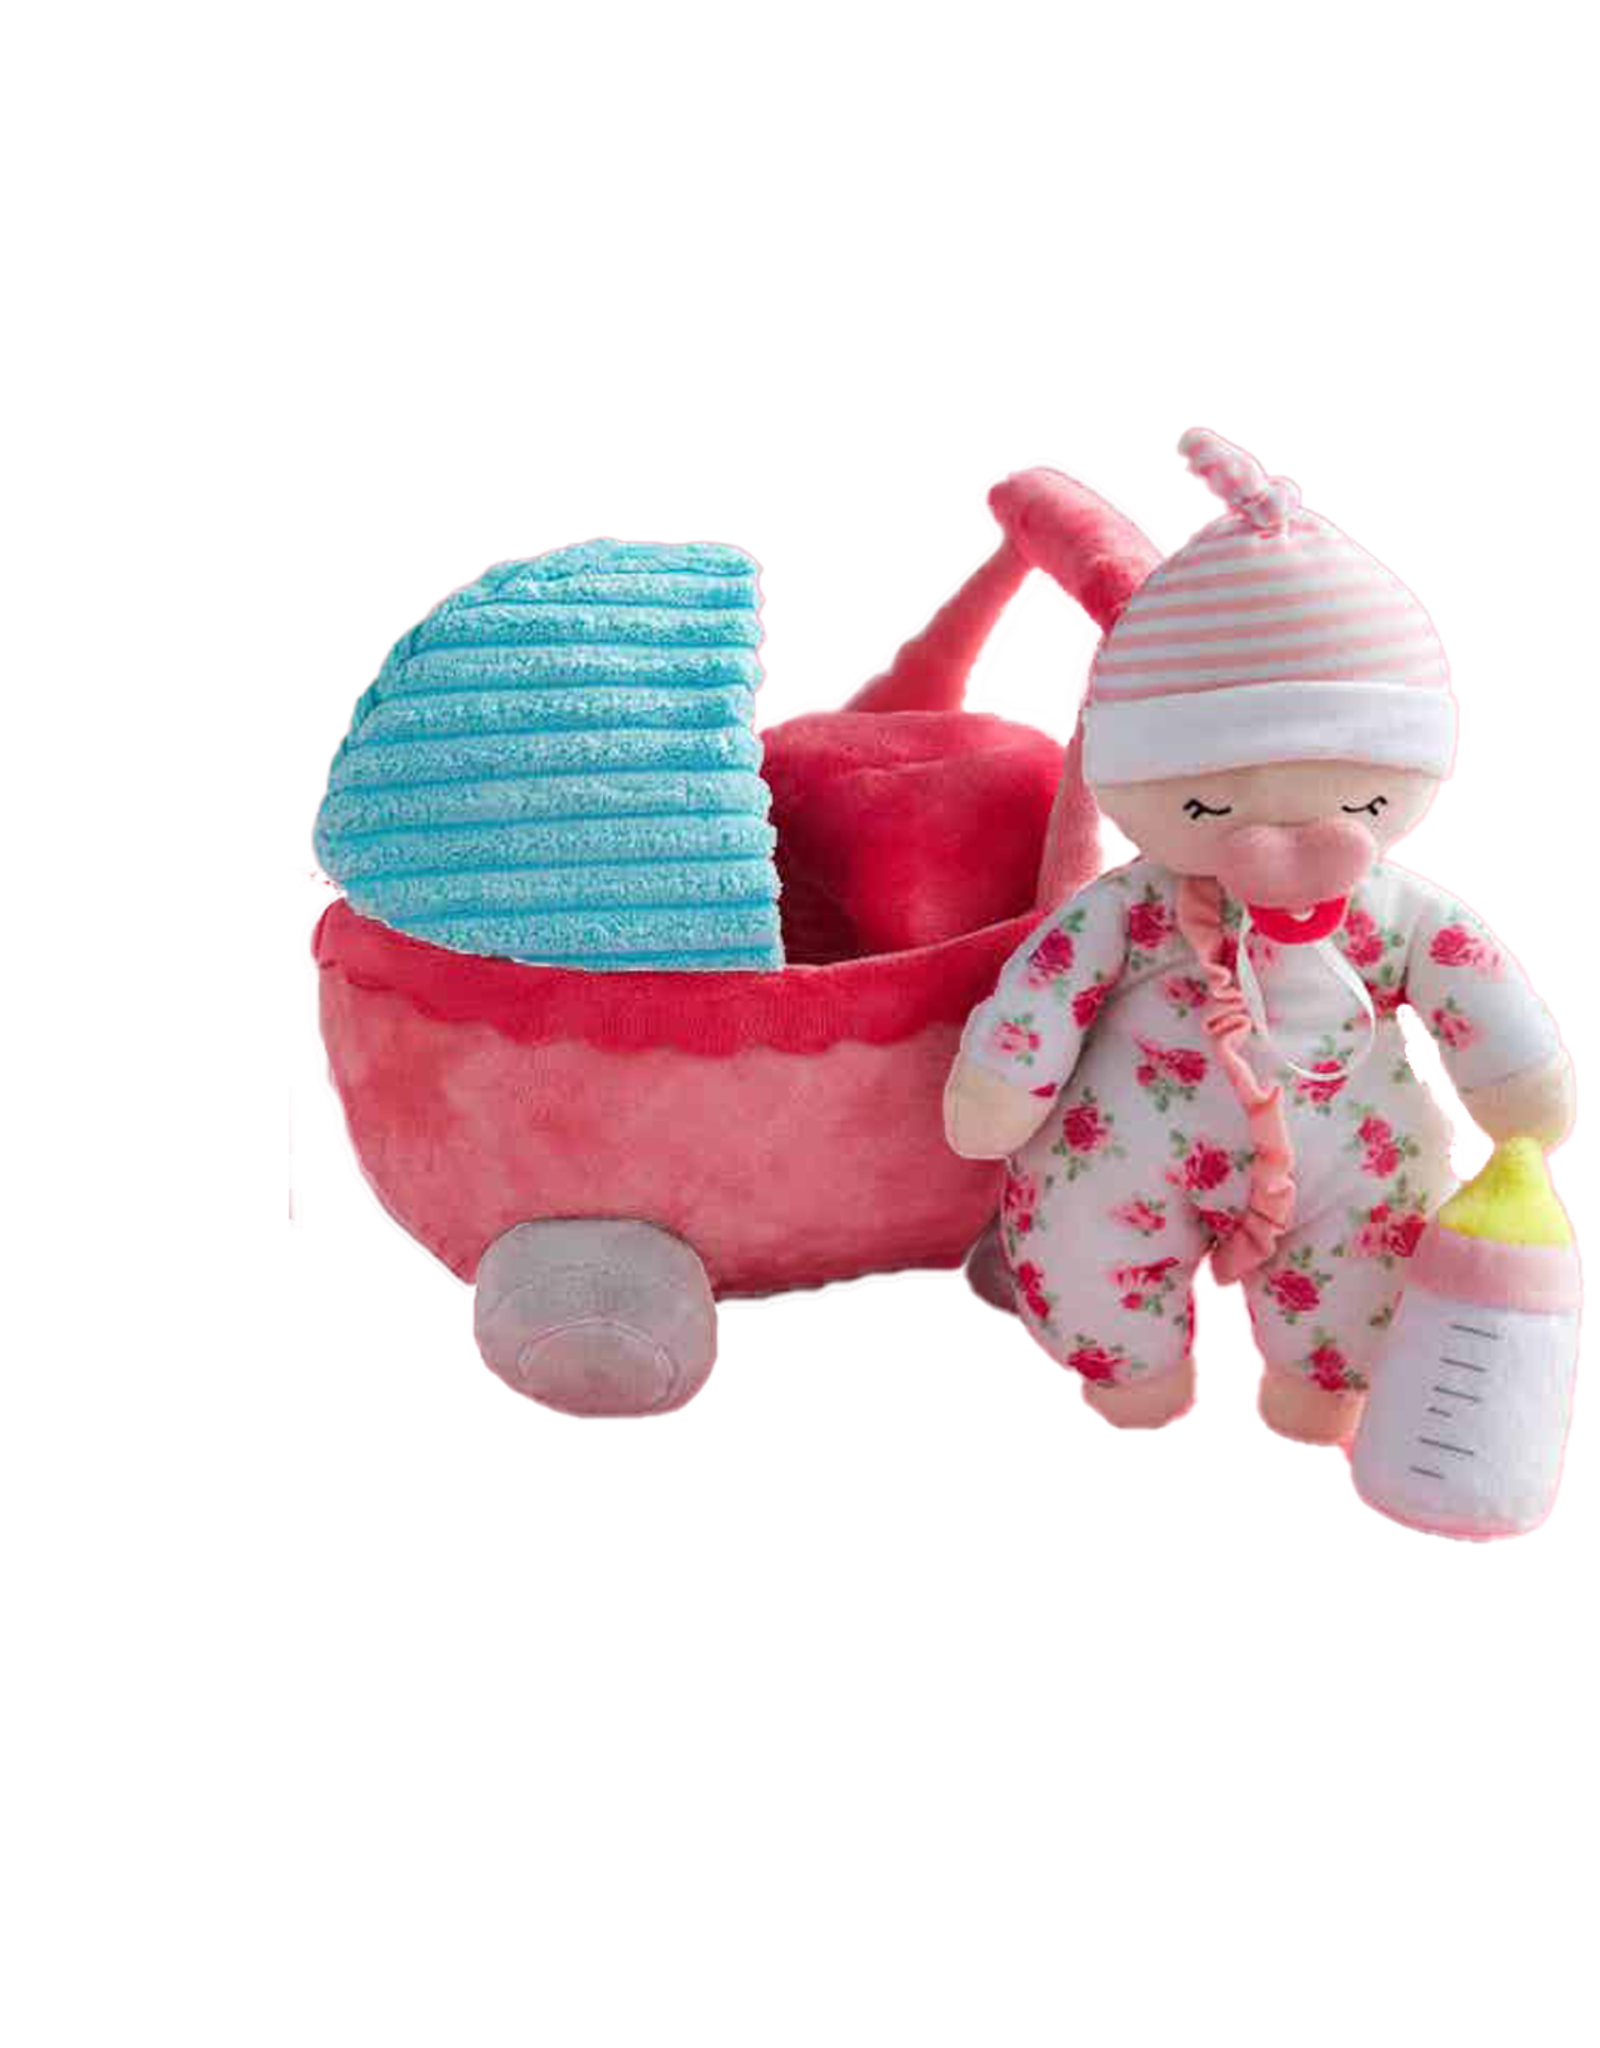 Mud Pie Kids Gifts Baby Doll And Stroller Plush Set